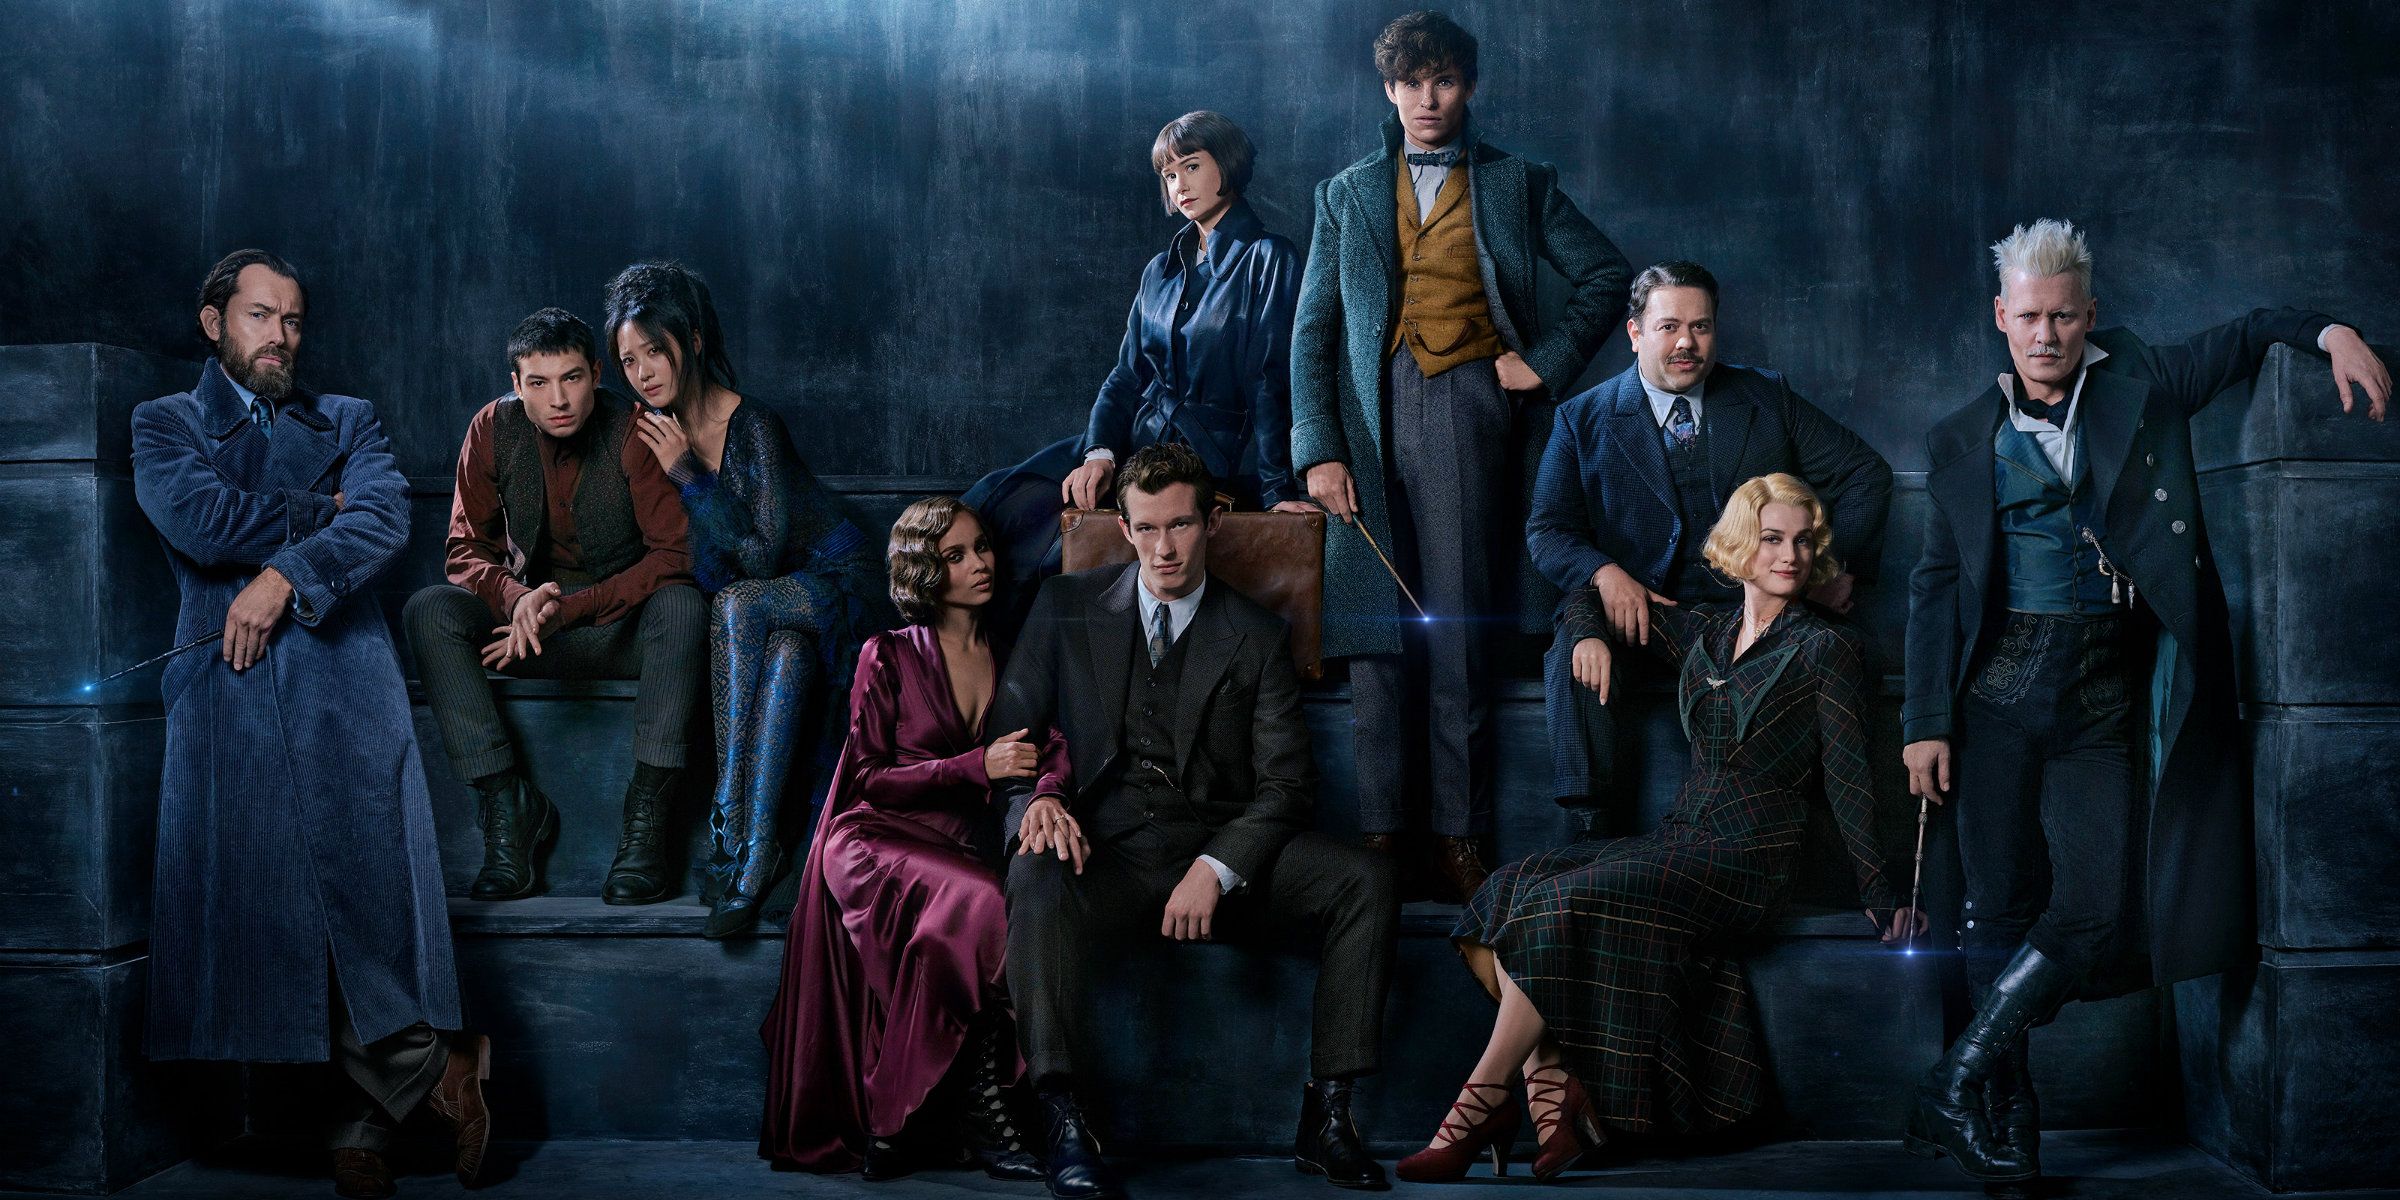 What Time Will The Fantastic Beasts 2 Trailer Release?